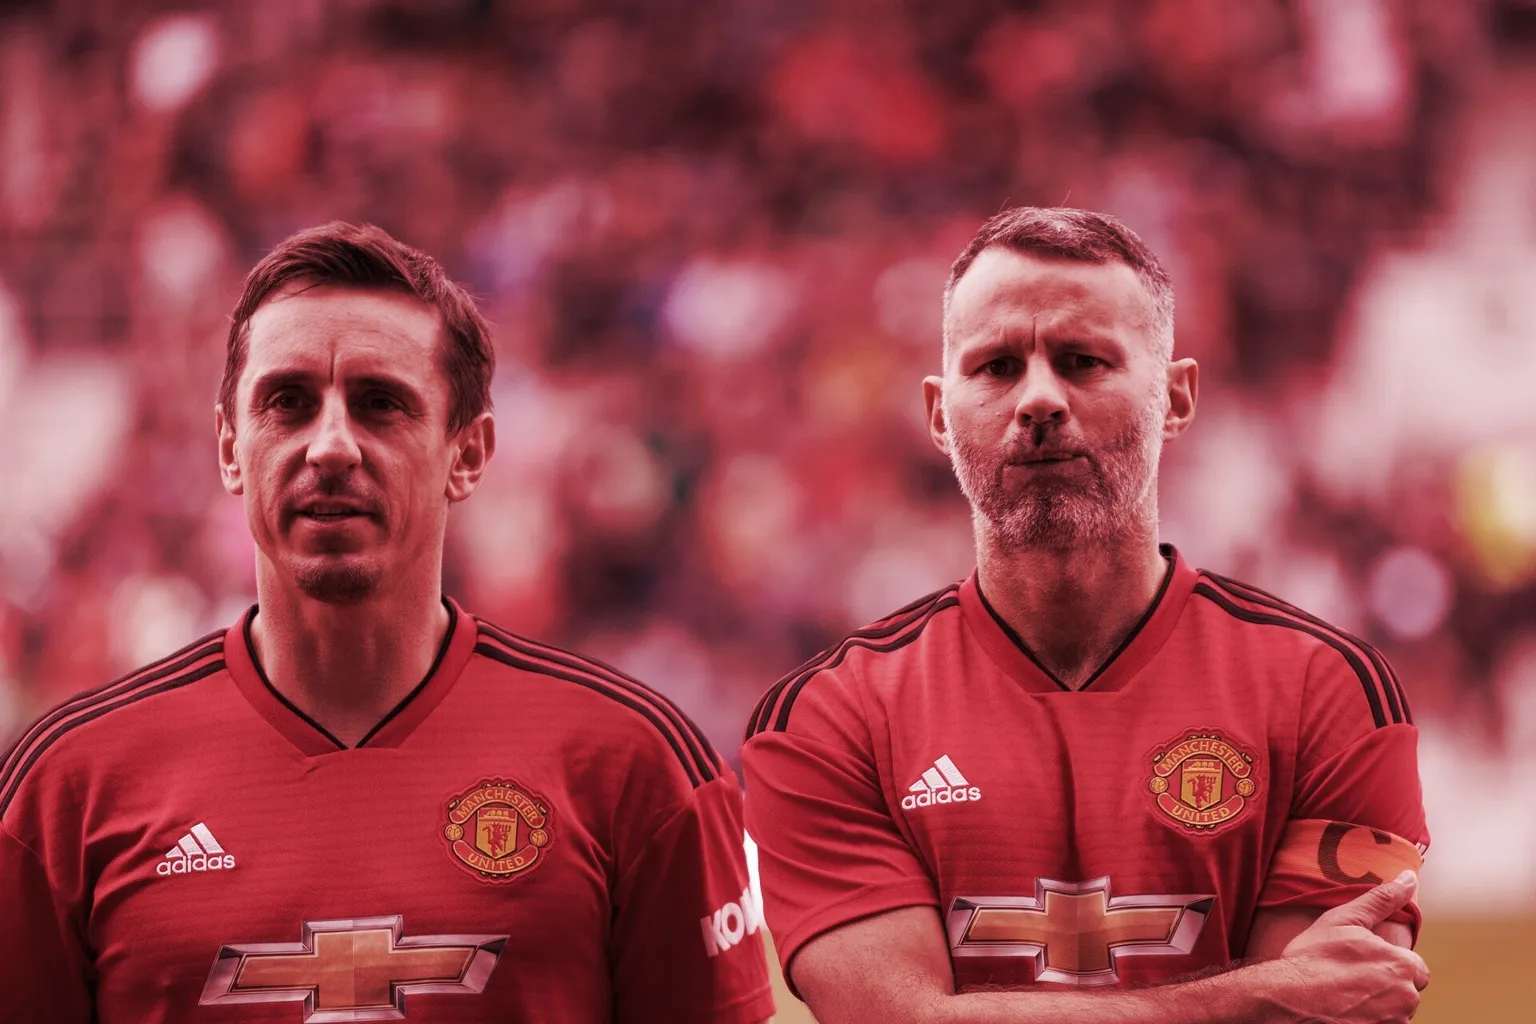 Gary Neville and Paul Scholes of Manchester United. Image. Shutterstock.